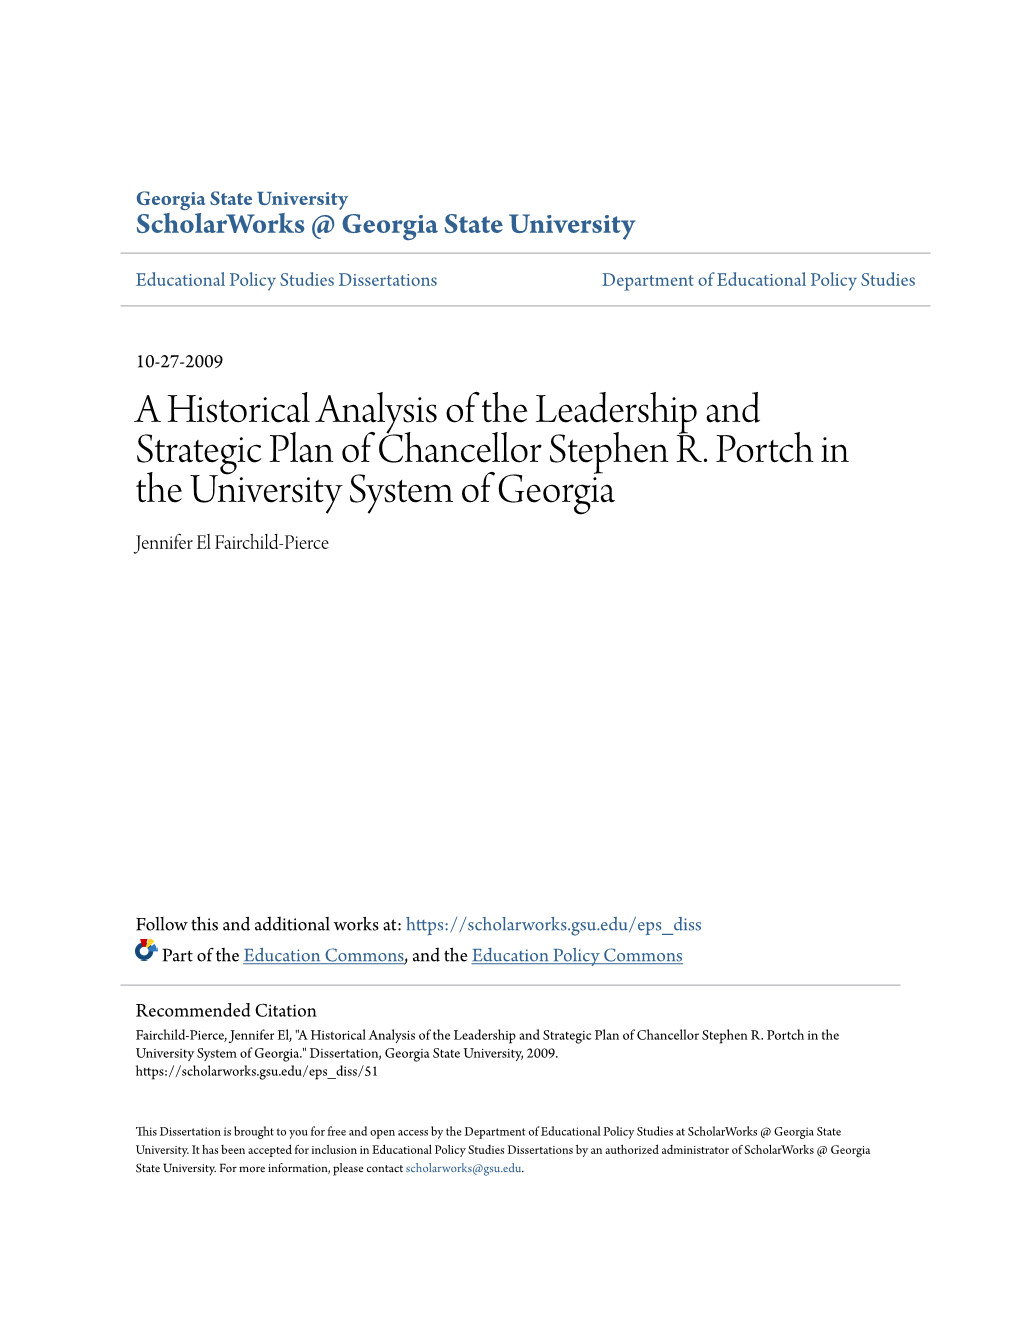 A Historical Analysis of the Leadership and Strategic Plan of Chancellor Stephen R